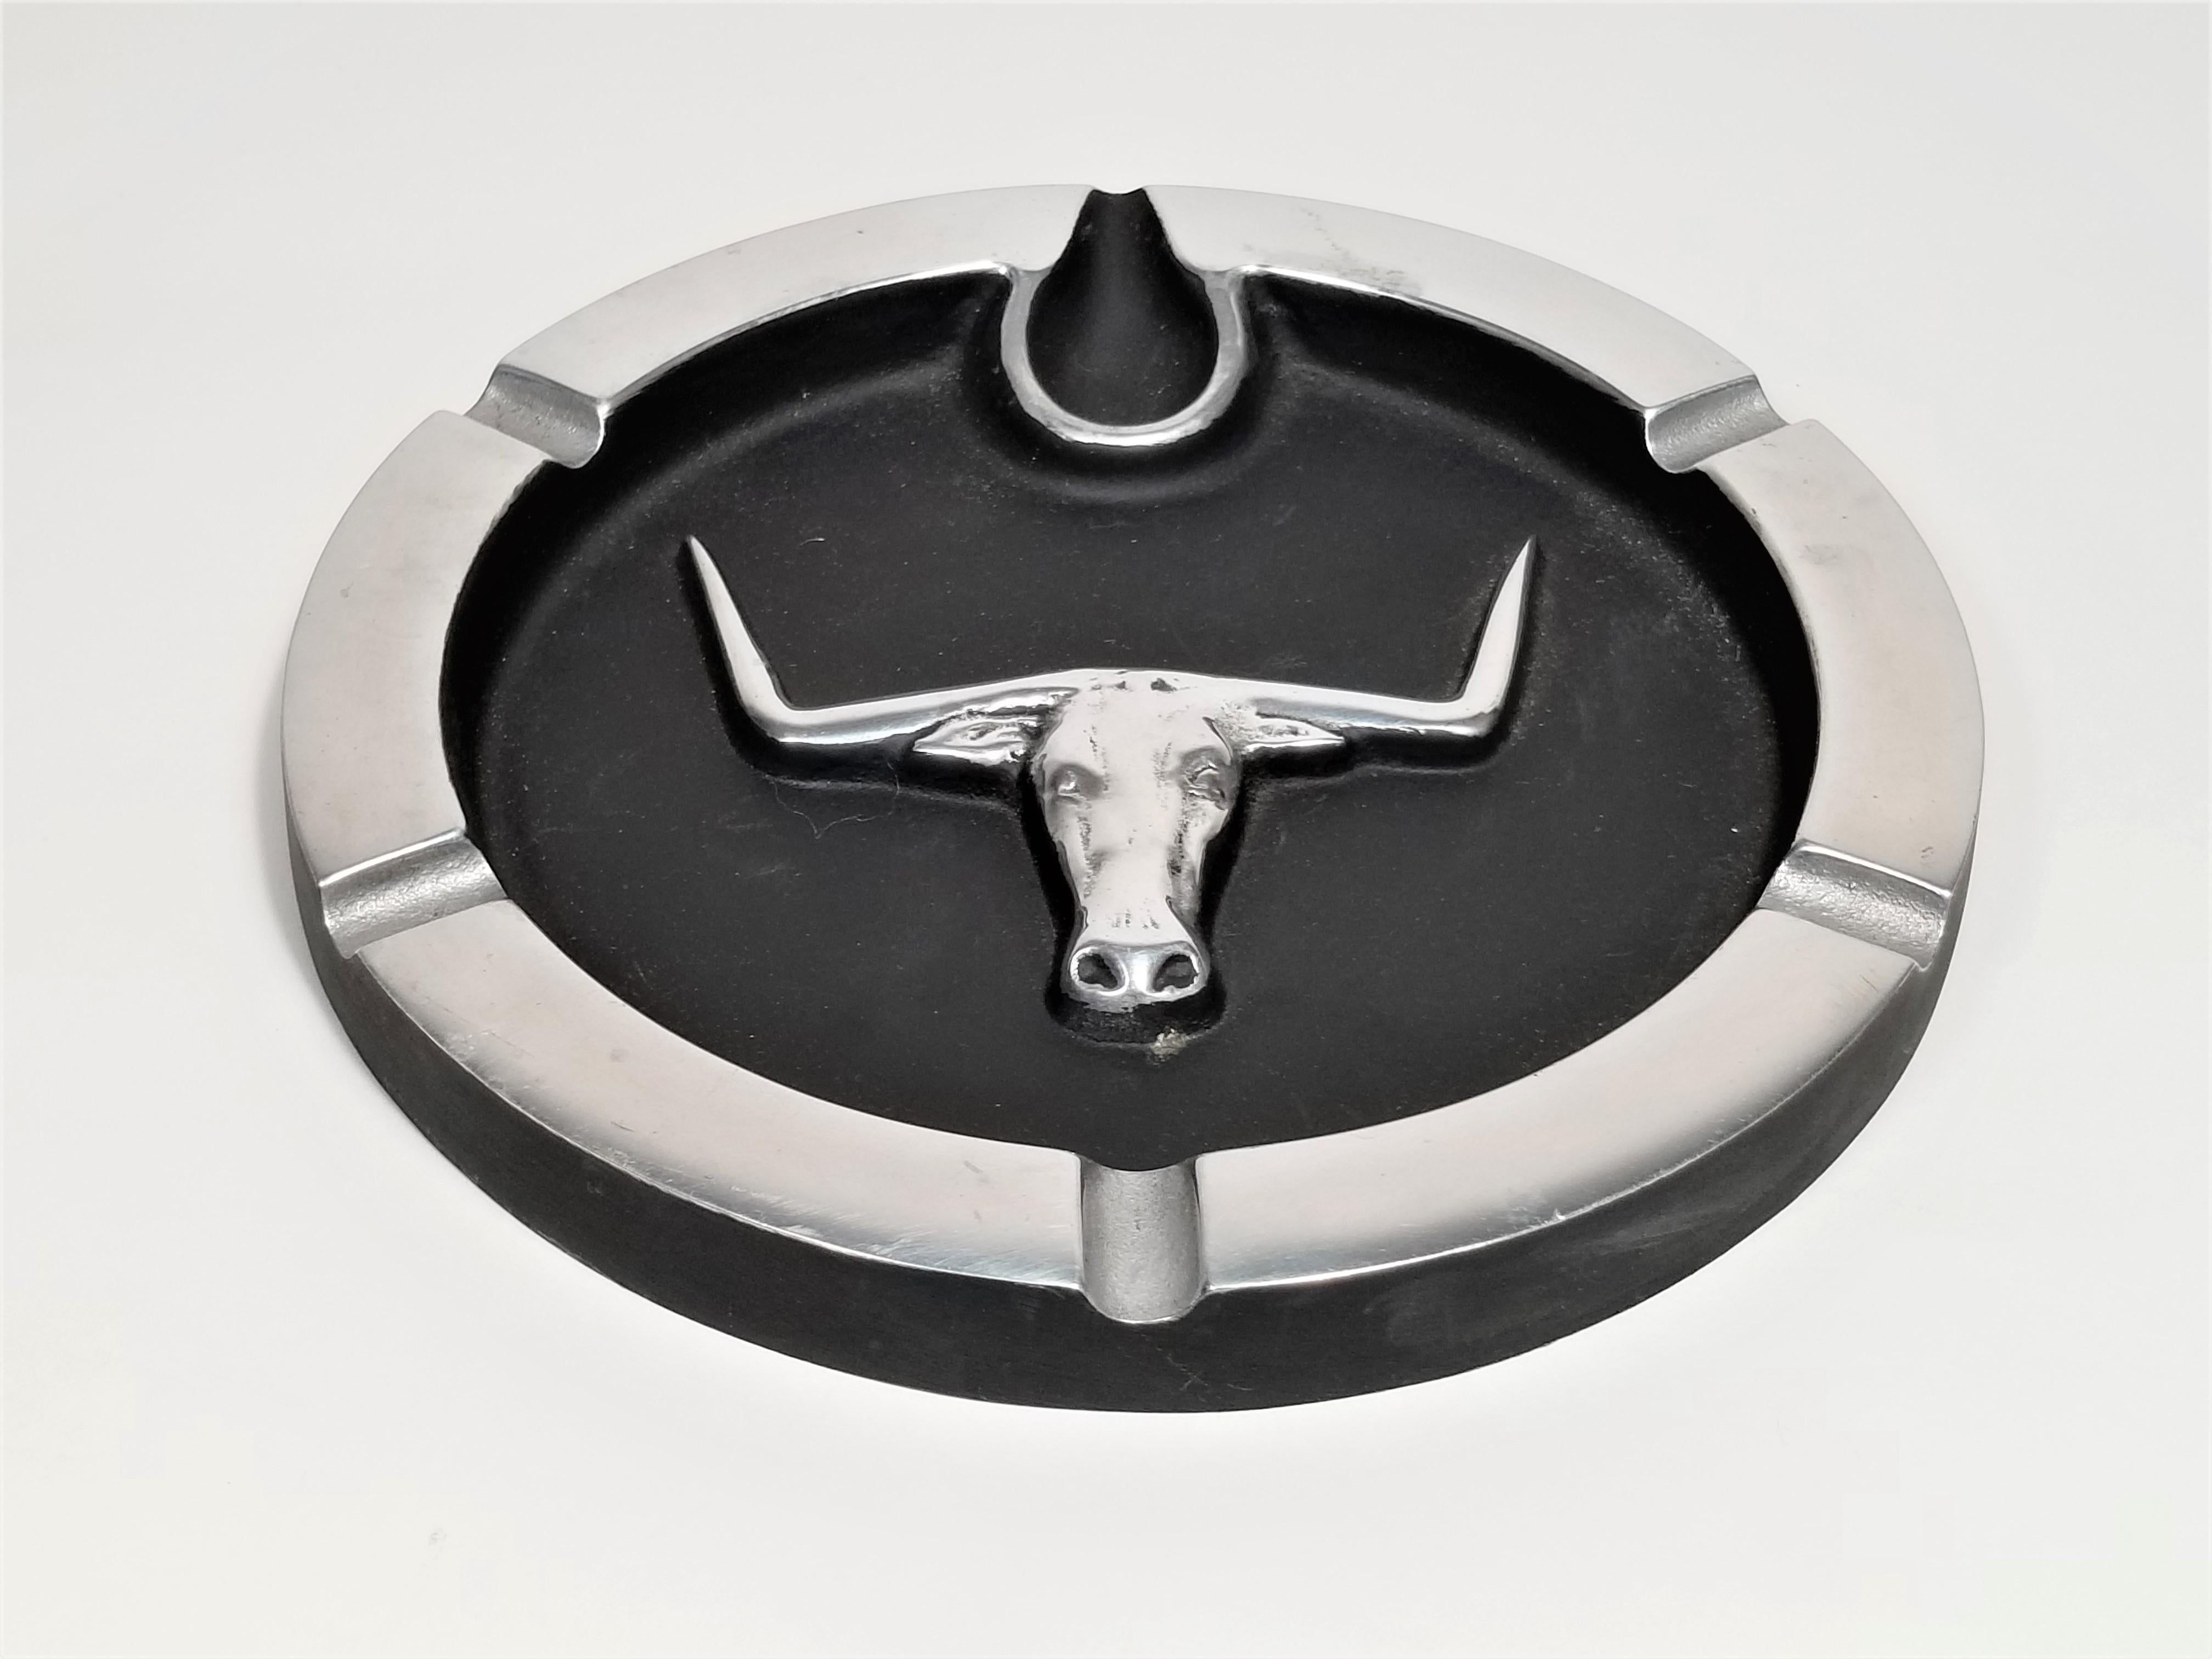 Dated 1977 longhorn steer ashtray. Pewter and steel / iron.
Made in USA.